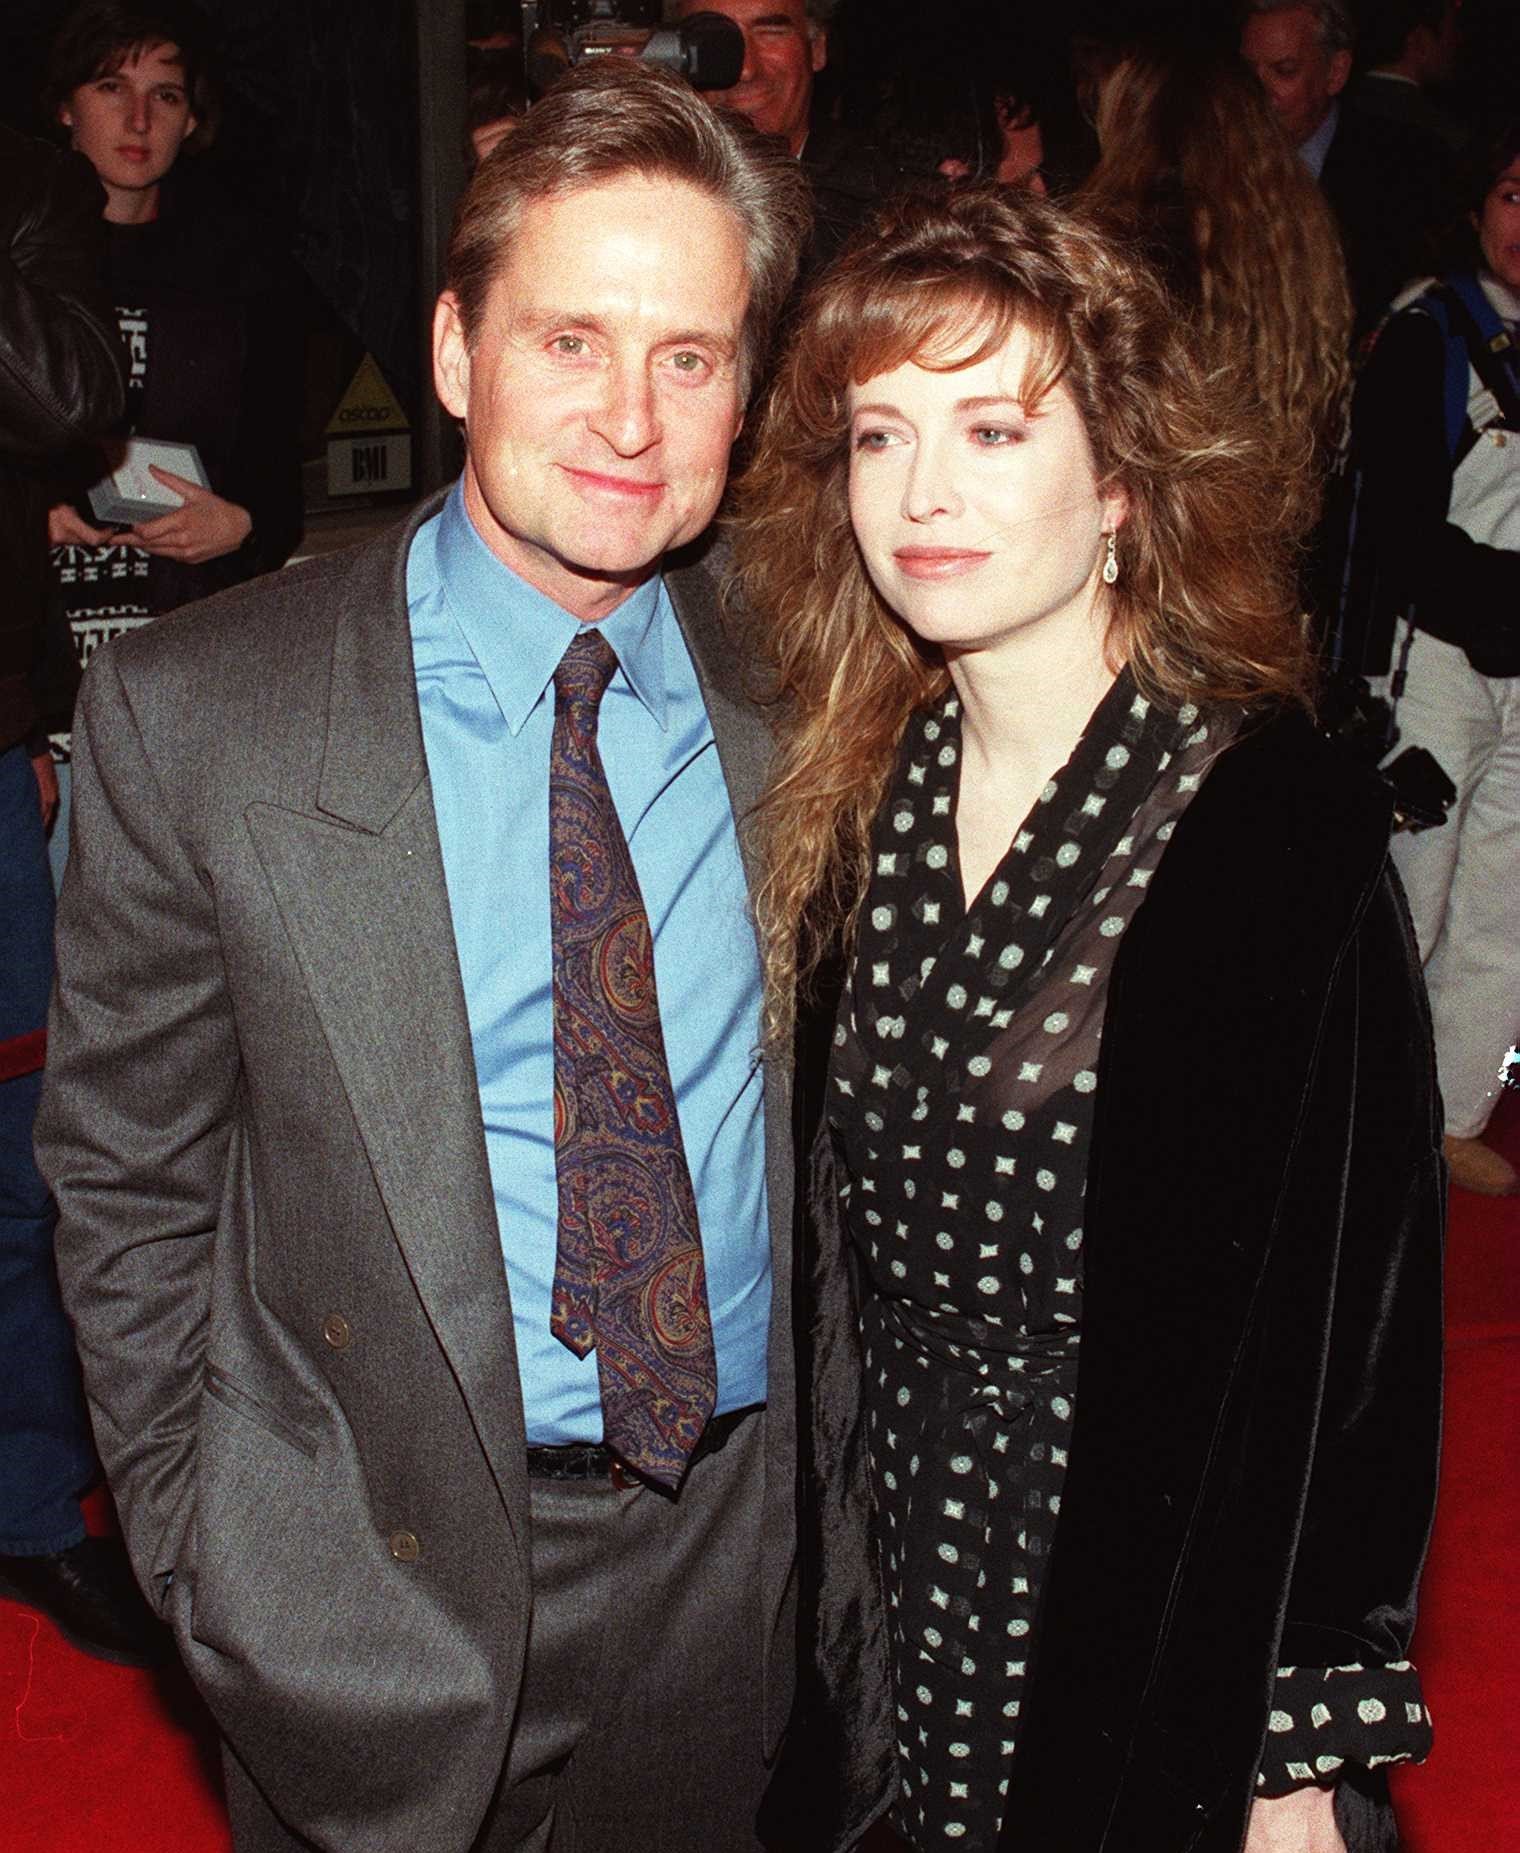 Michael Douglas and wife Diandra at the premiere of his film "Disclosure" in 1994 | Photo: GettyImages